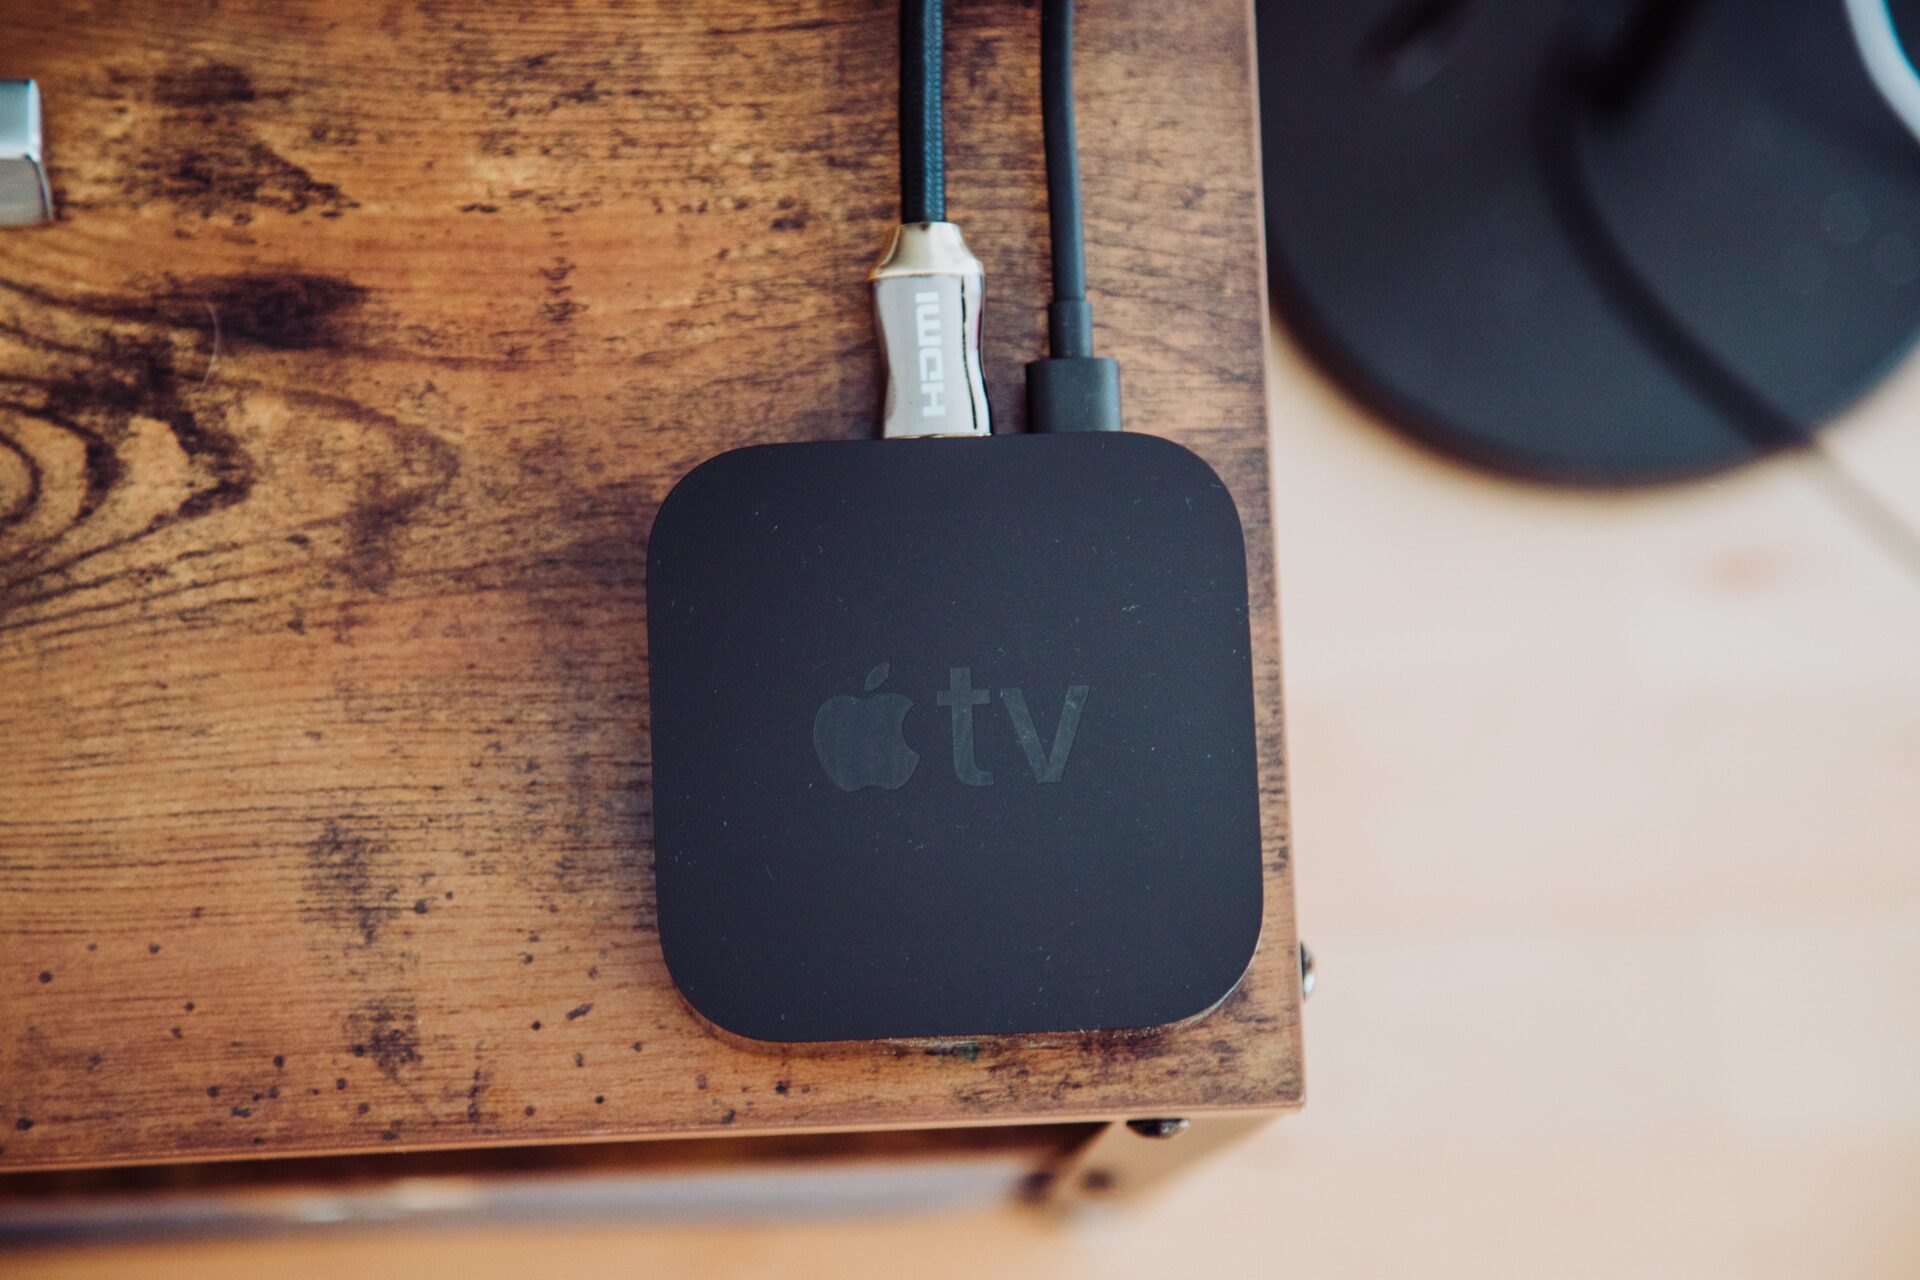 TVs Suitable For Connection With Apple TV